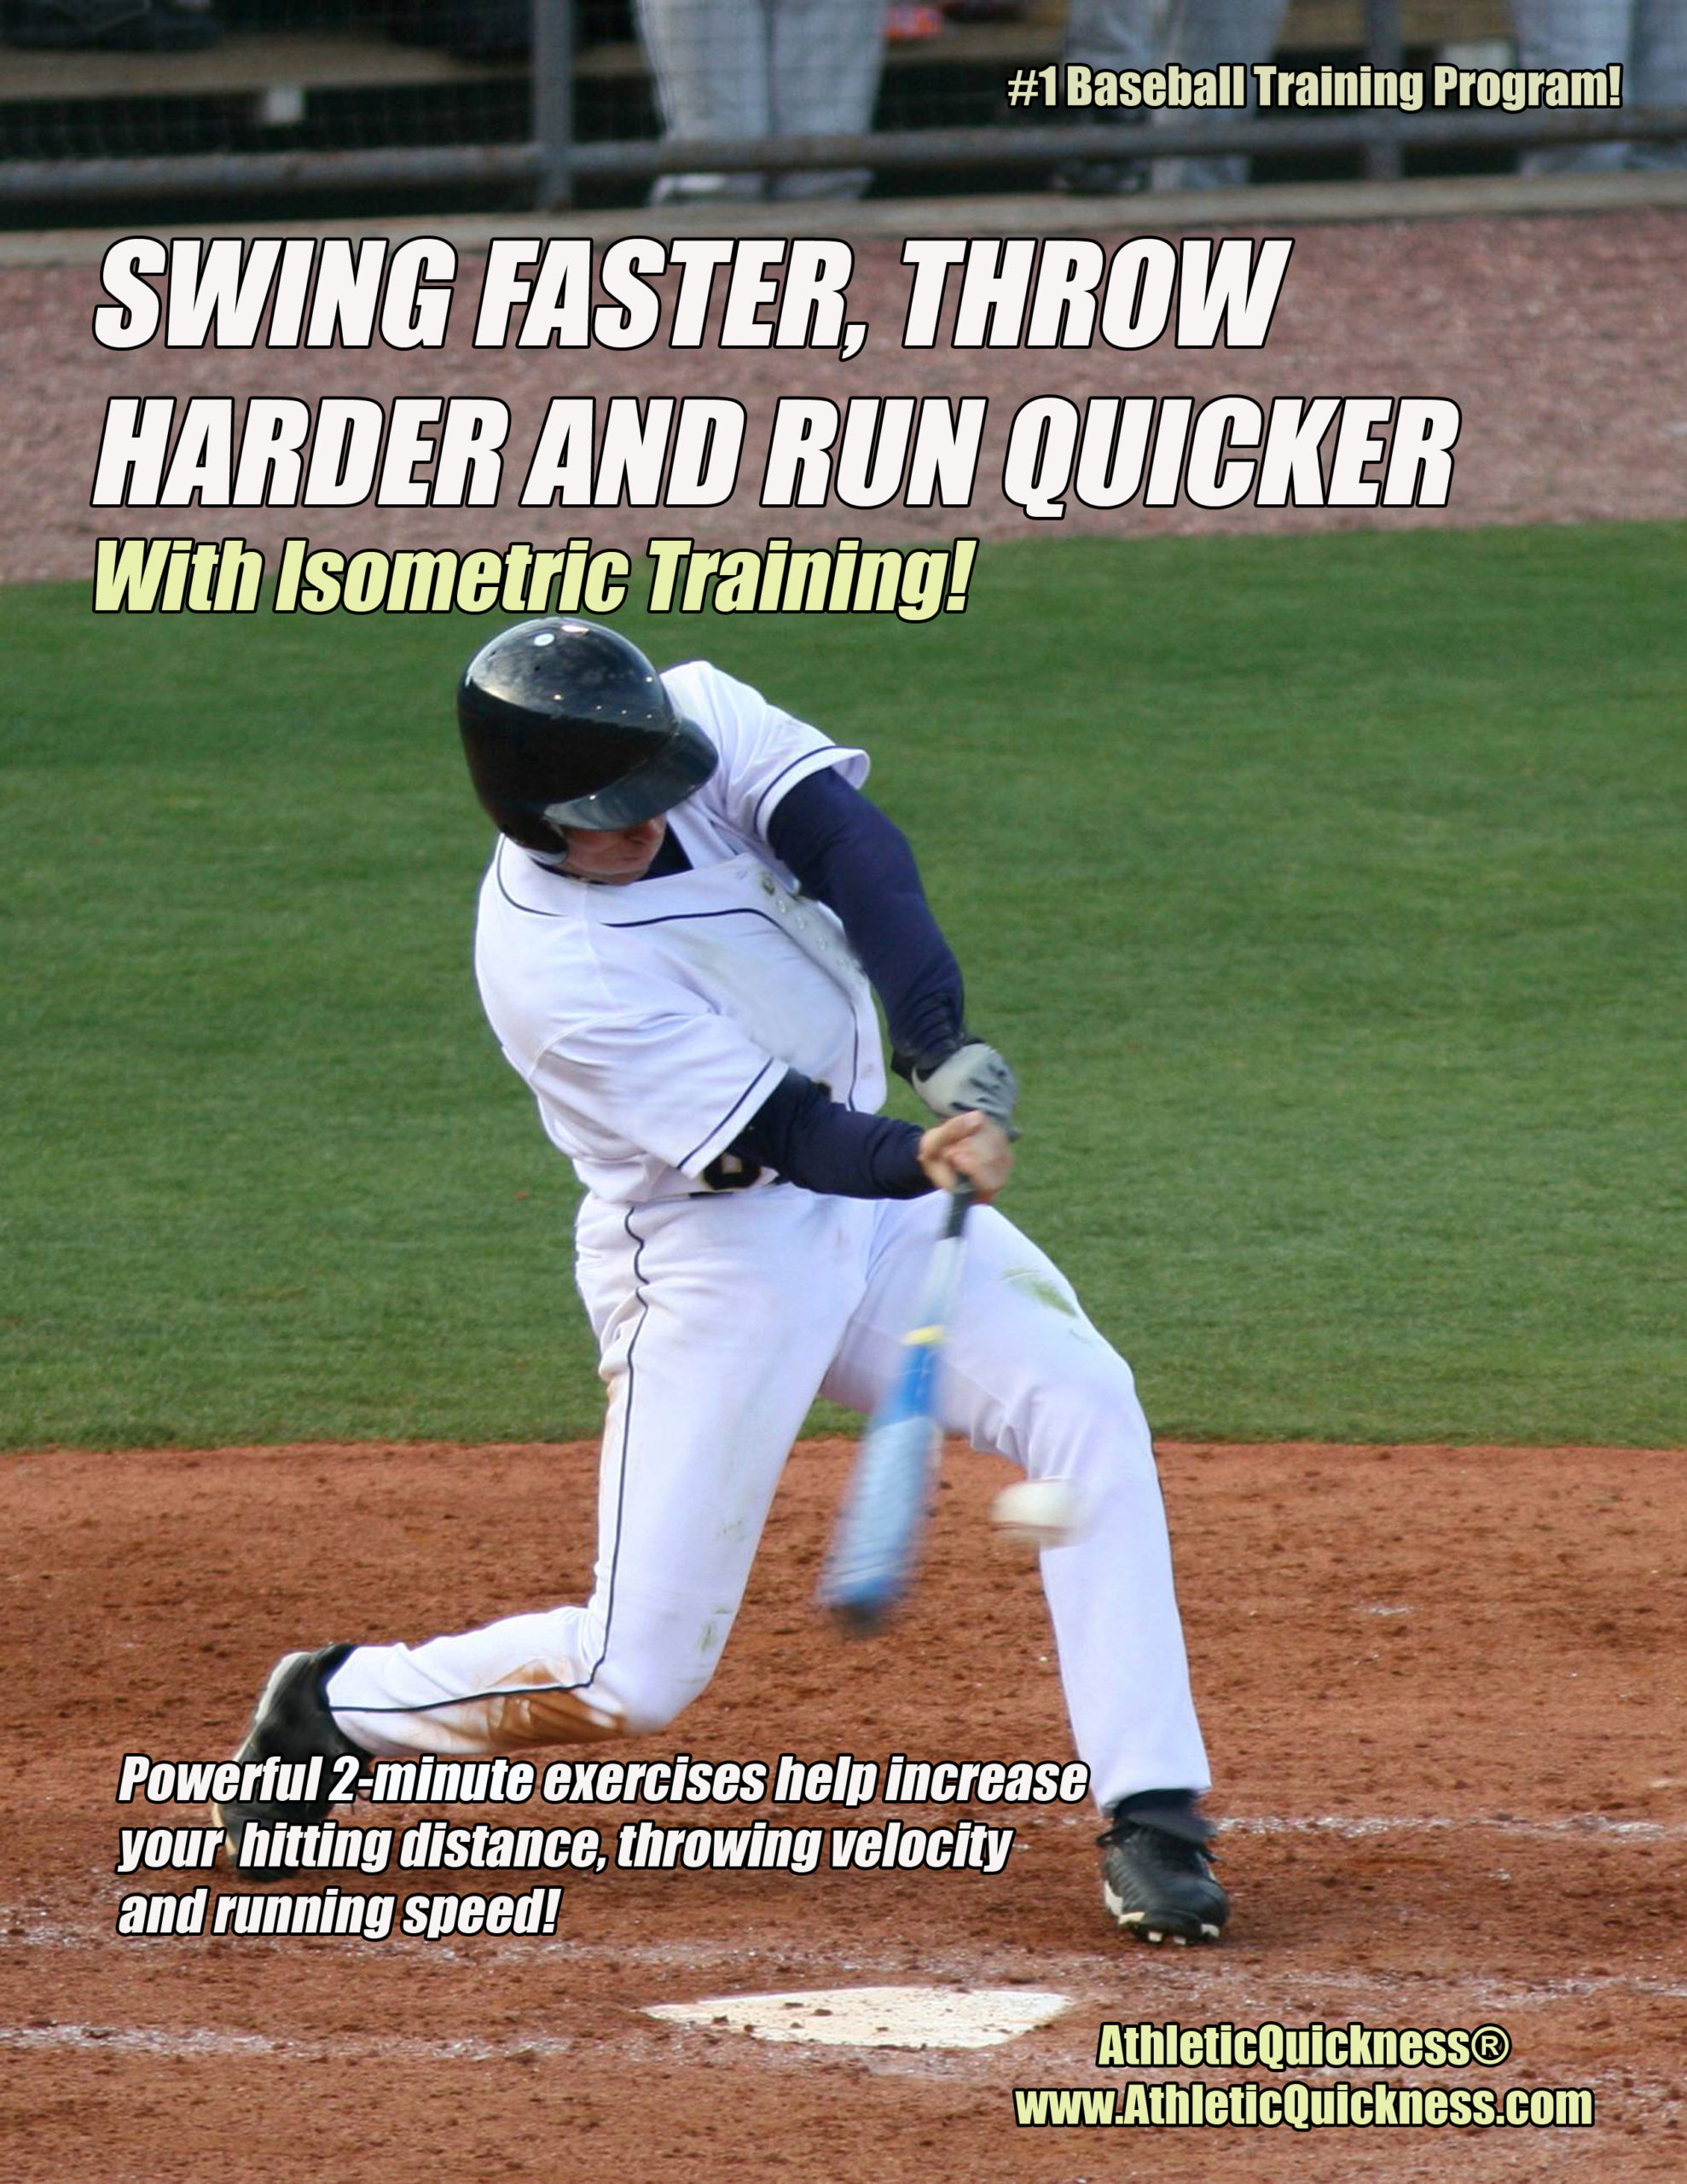 Swing faster and hit with power